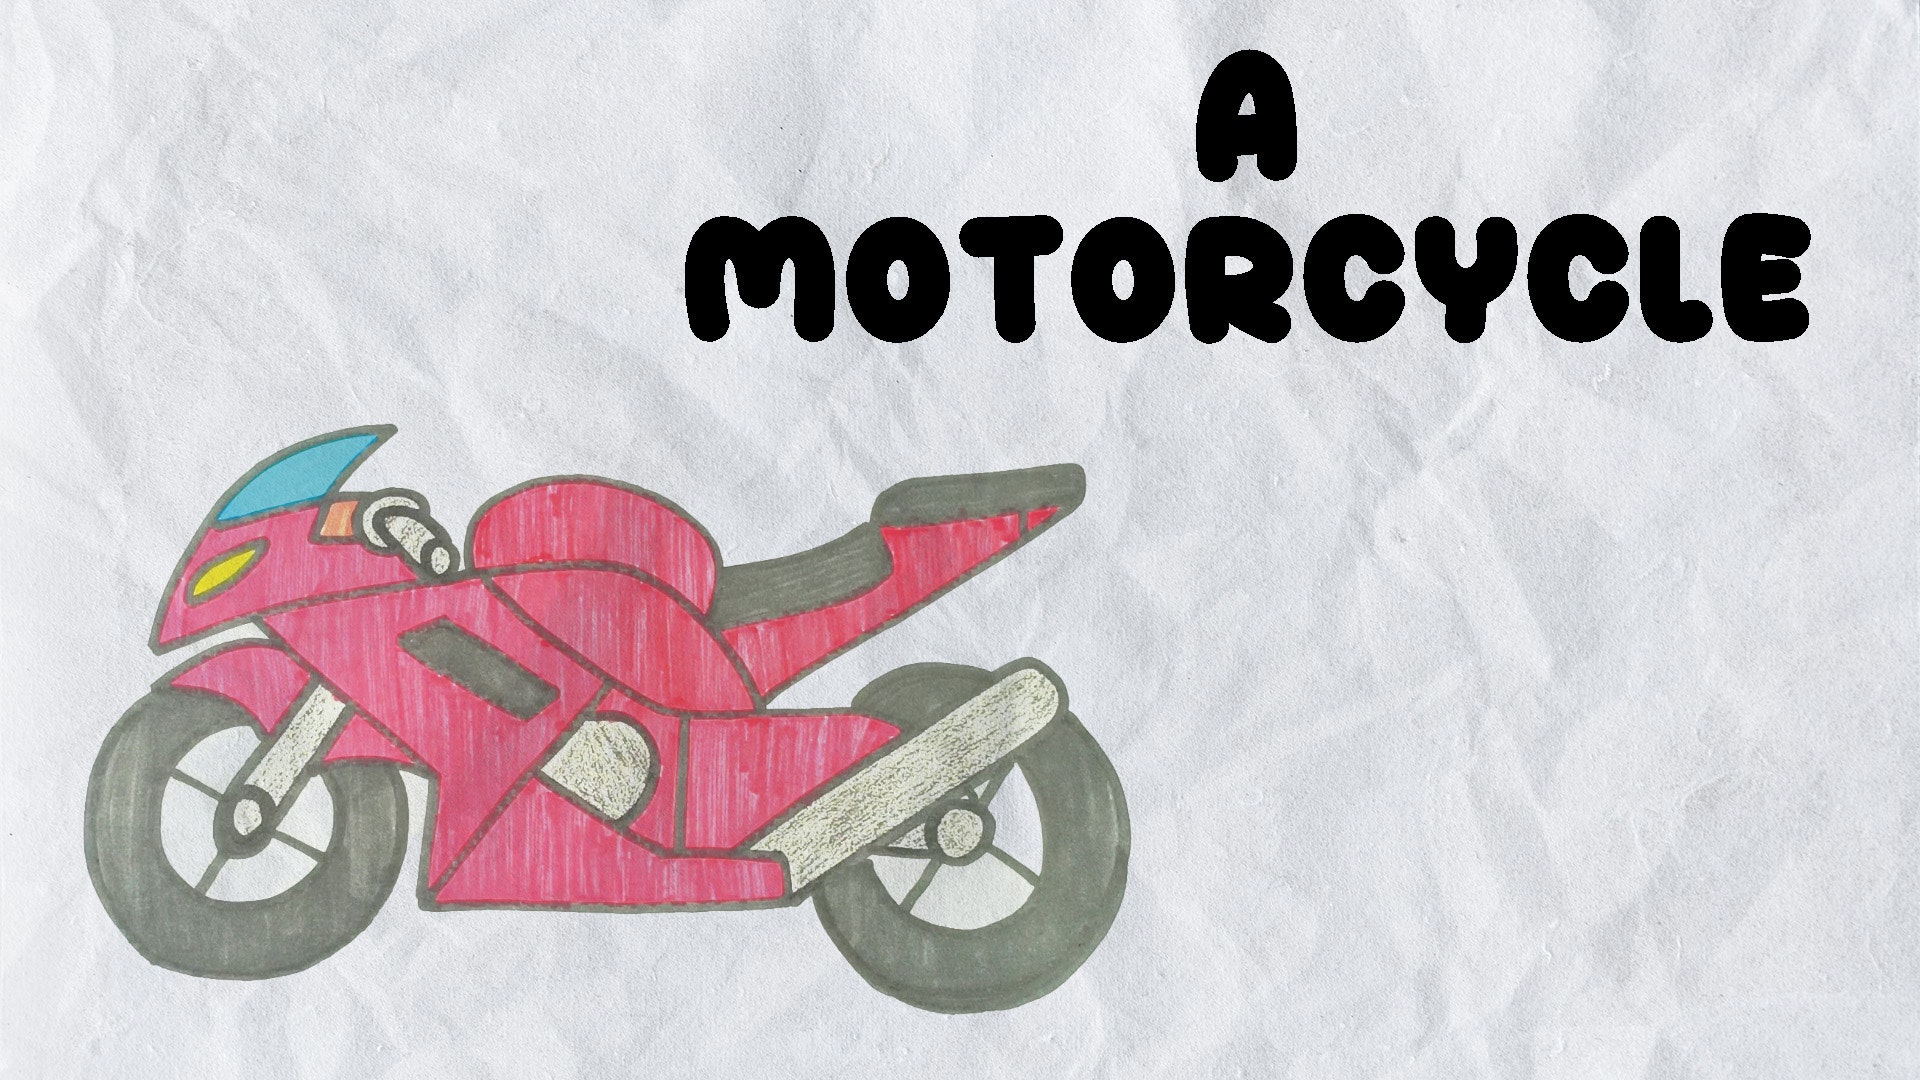 How to draw a MOTORCYCLE step by step / draw bike easy - YouTube